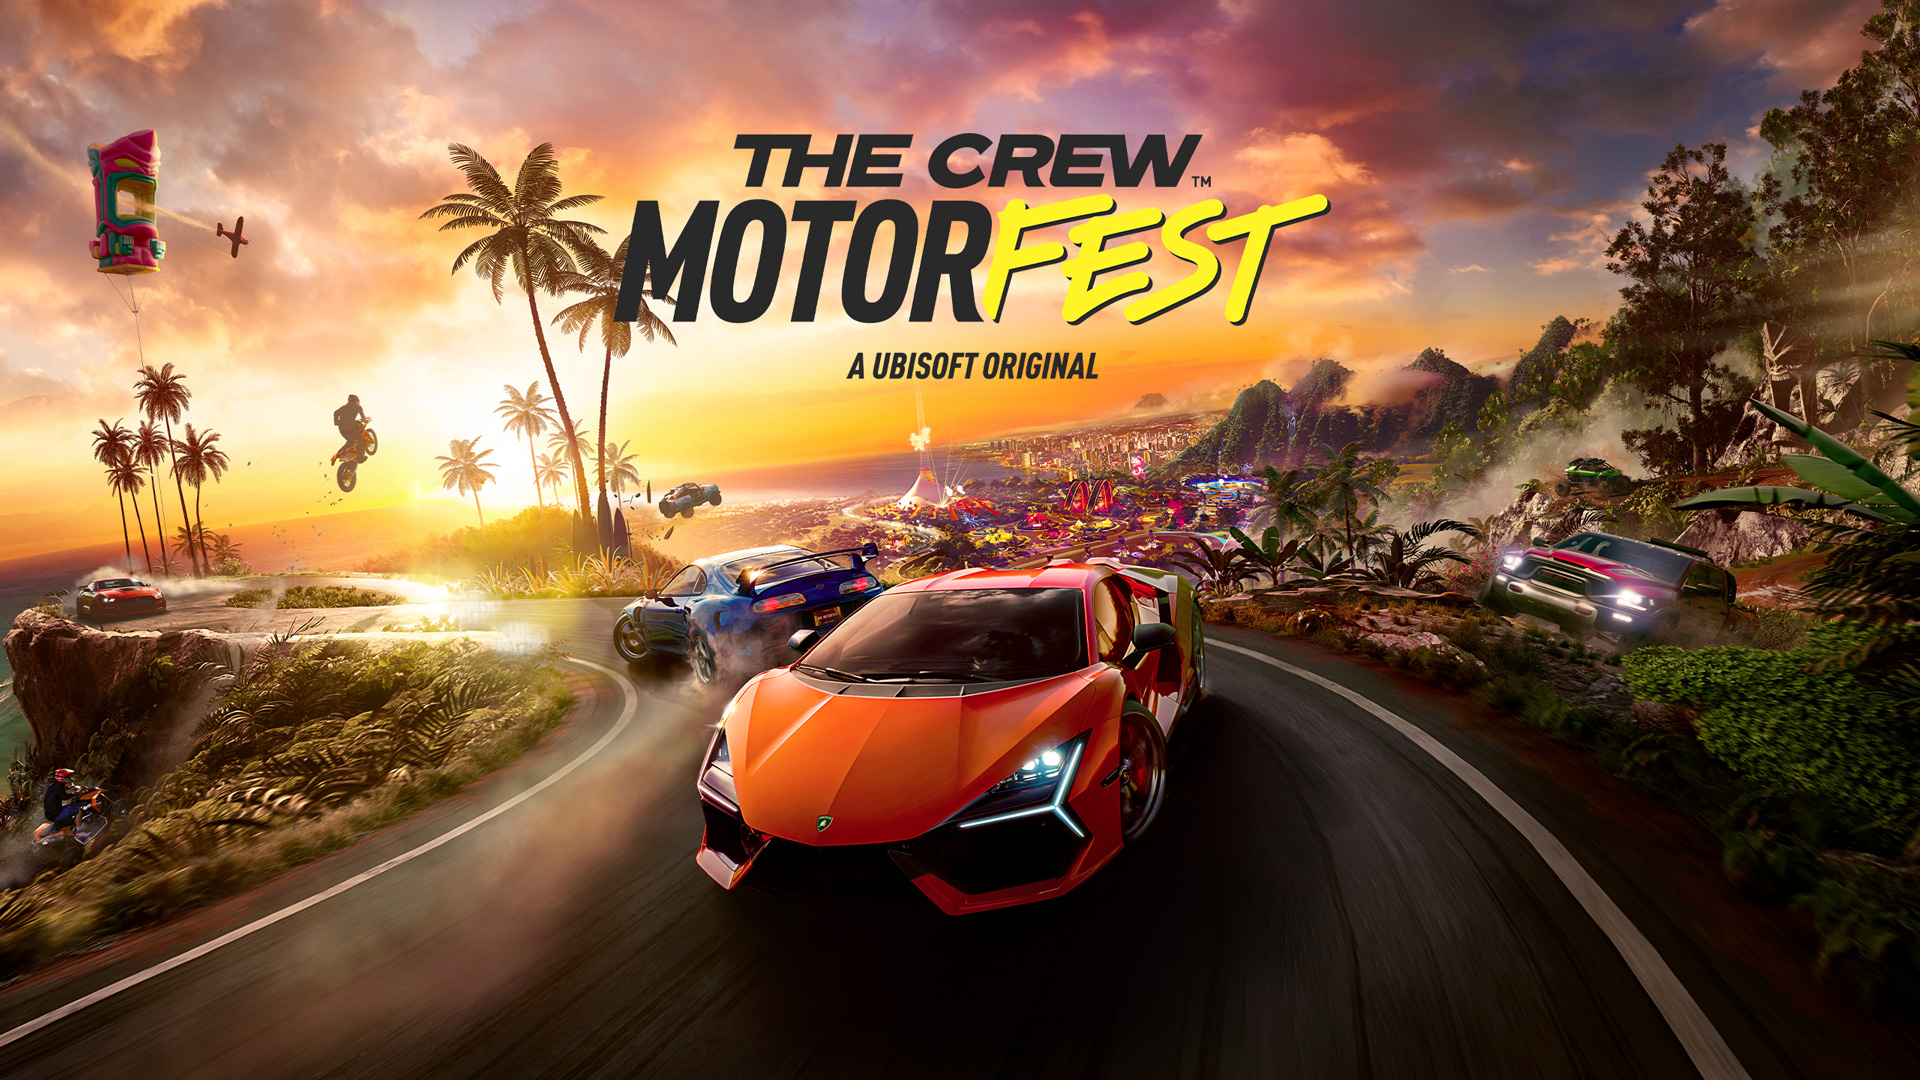 The Crew Motorfest - How To Import Your Crew 2 Collection